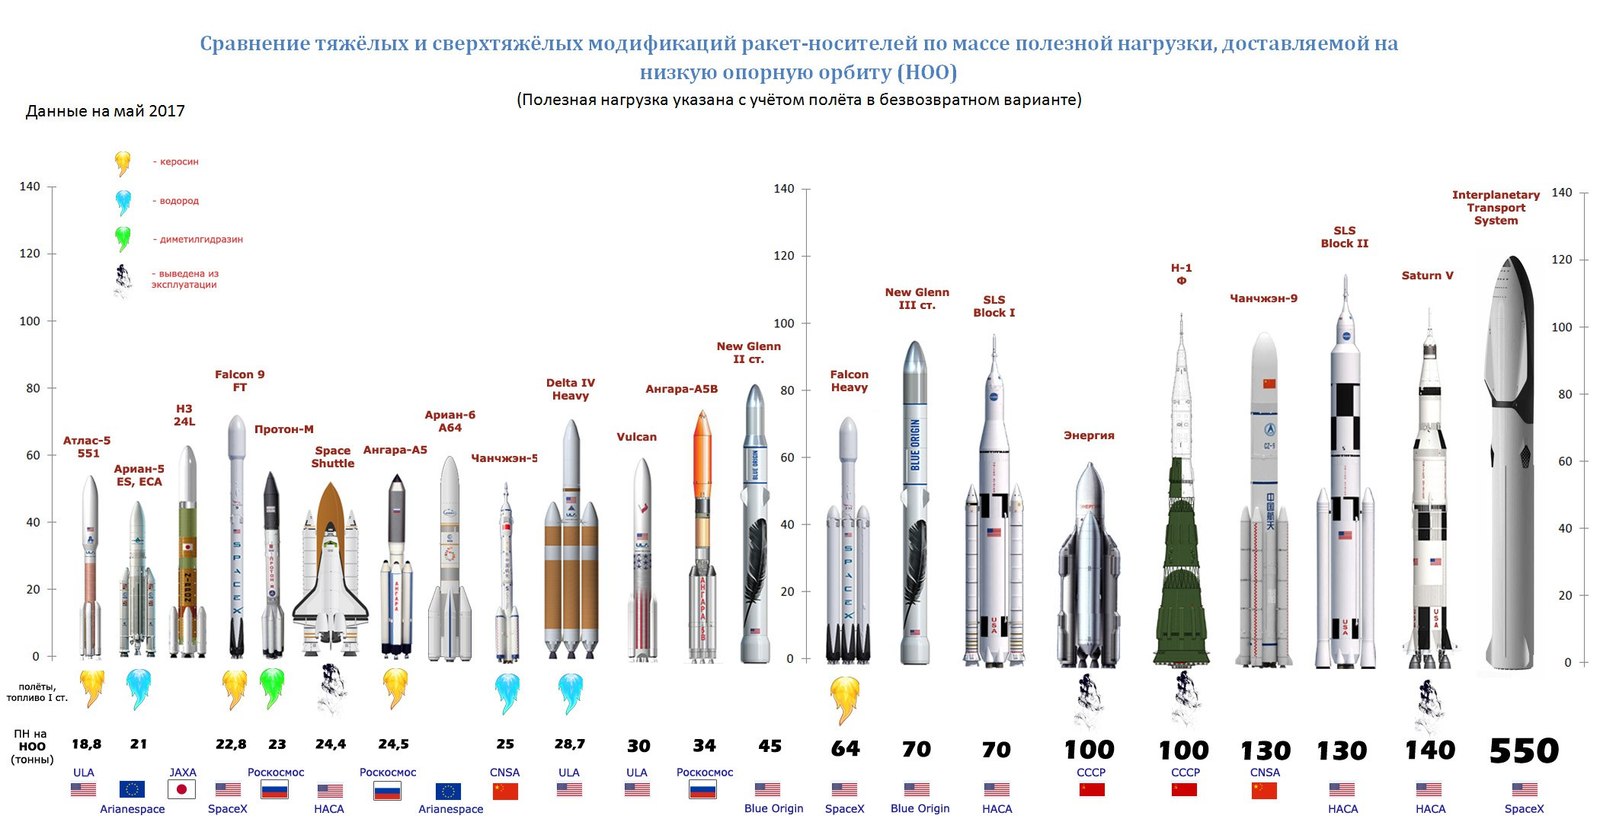 Comparison of heavy and superheavy modifications of launch vehicles. - Elon Musk, Roscosmos, Booster Rocket, Spacex, Longpost, Space, Falcon 9